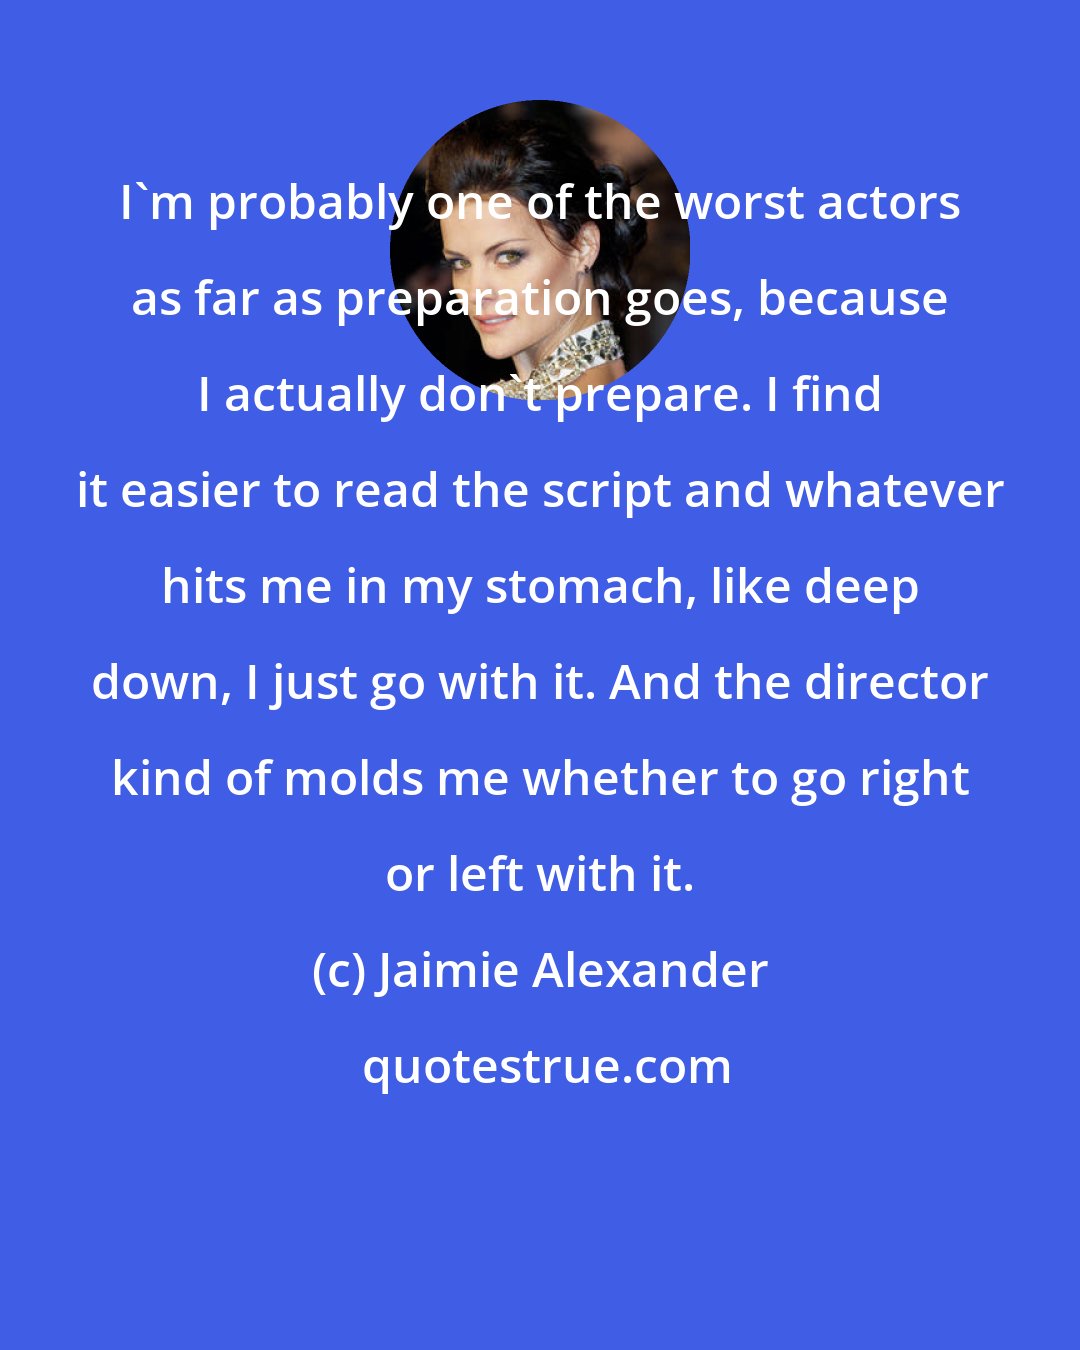 Jaimie Alexander: I'm probably one of the worst actors as far as preparation goes, because I actually don't prepare. I find it easier to read the script and whatever hits me in my stomach, like deep down, I just go with it. And the director kind of molds me whether to go right or left with it.